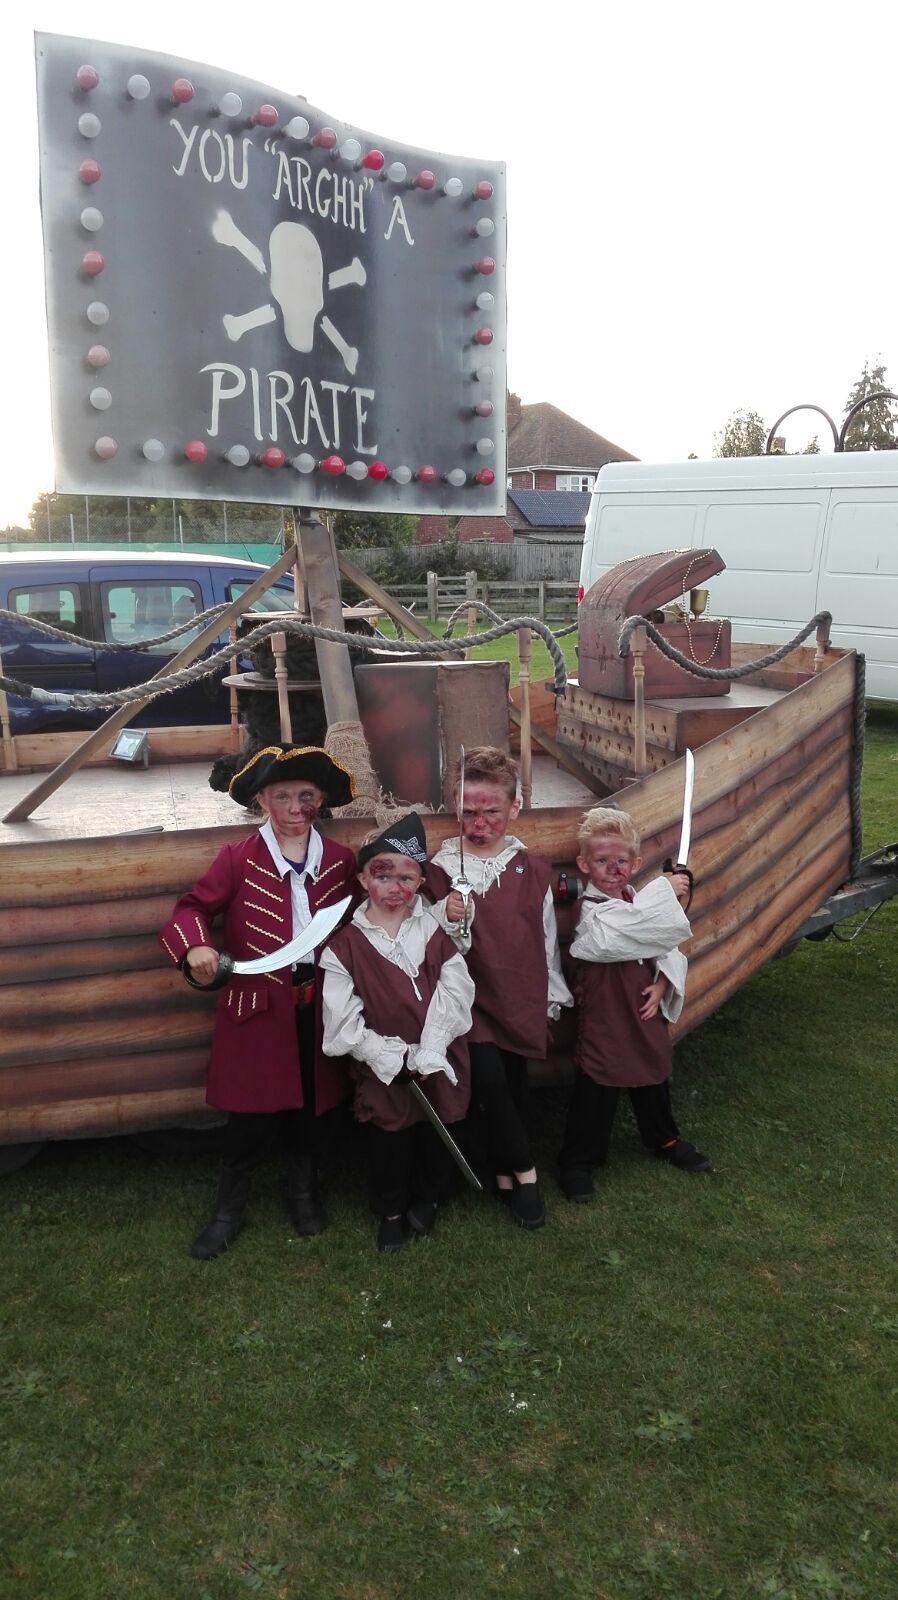 Pictures from the South Petherton Carnival